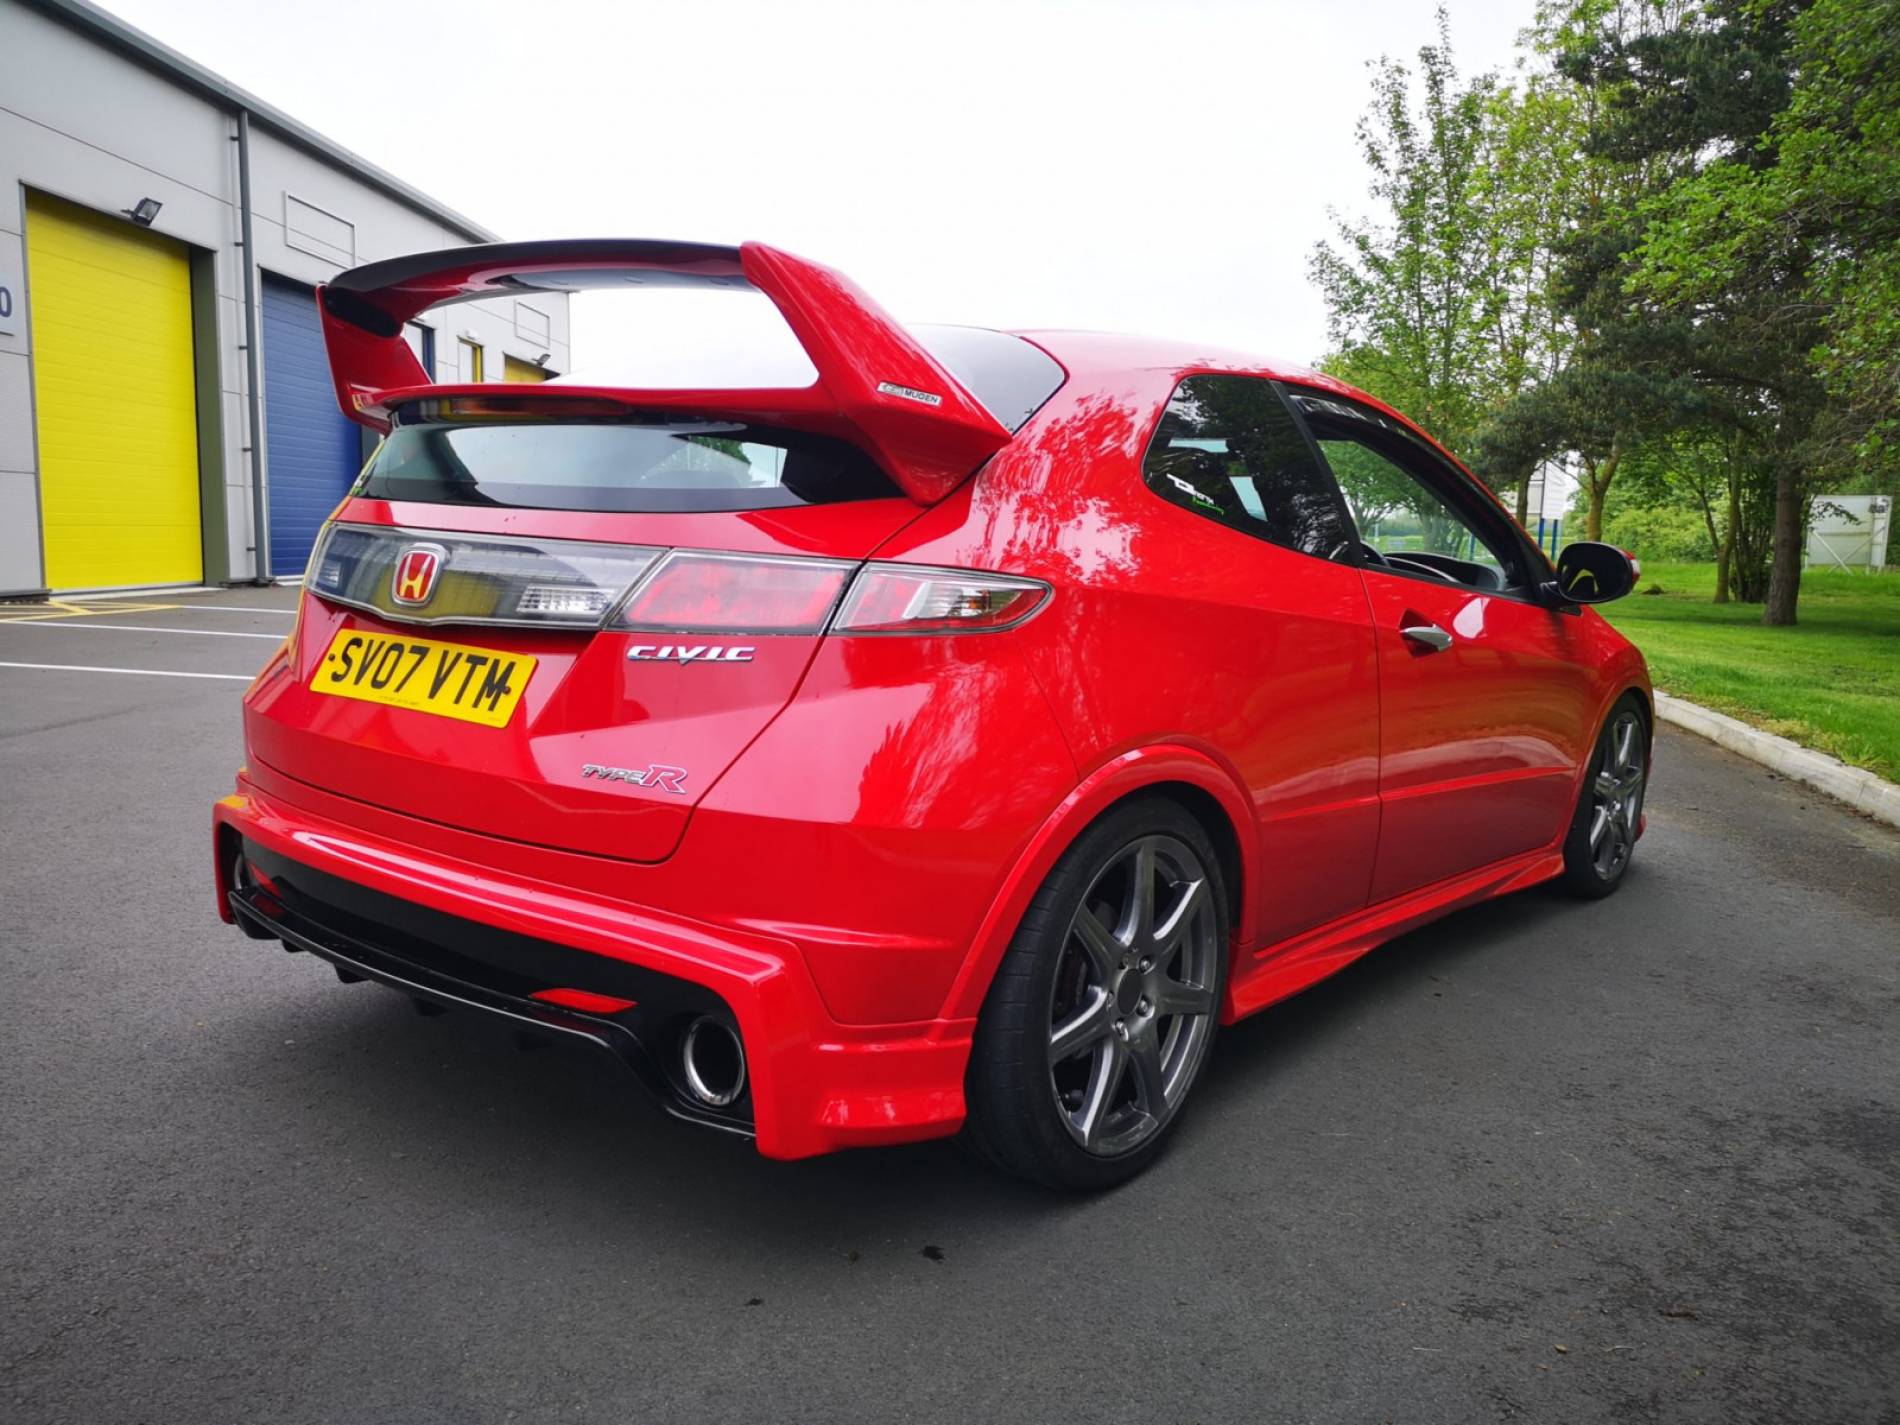 390HP Mugen FN2 Civic Type R Supercharged